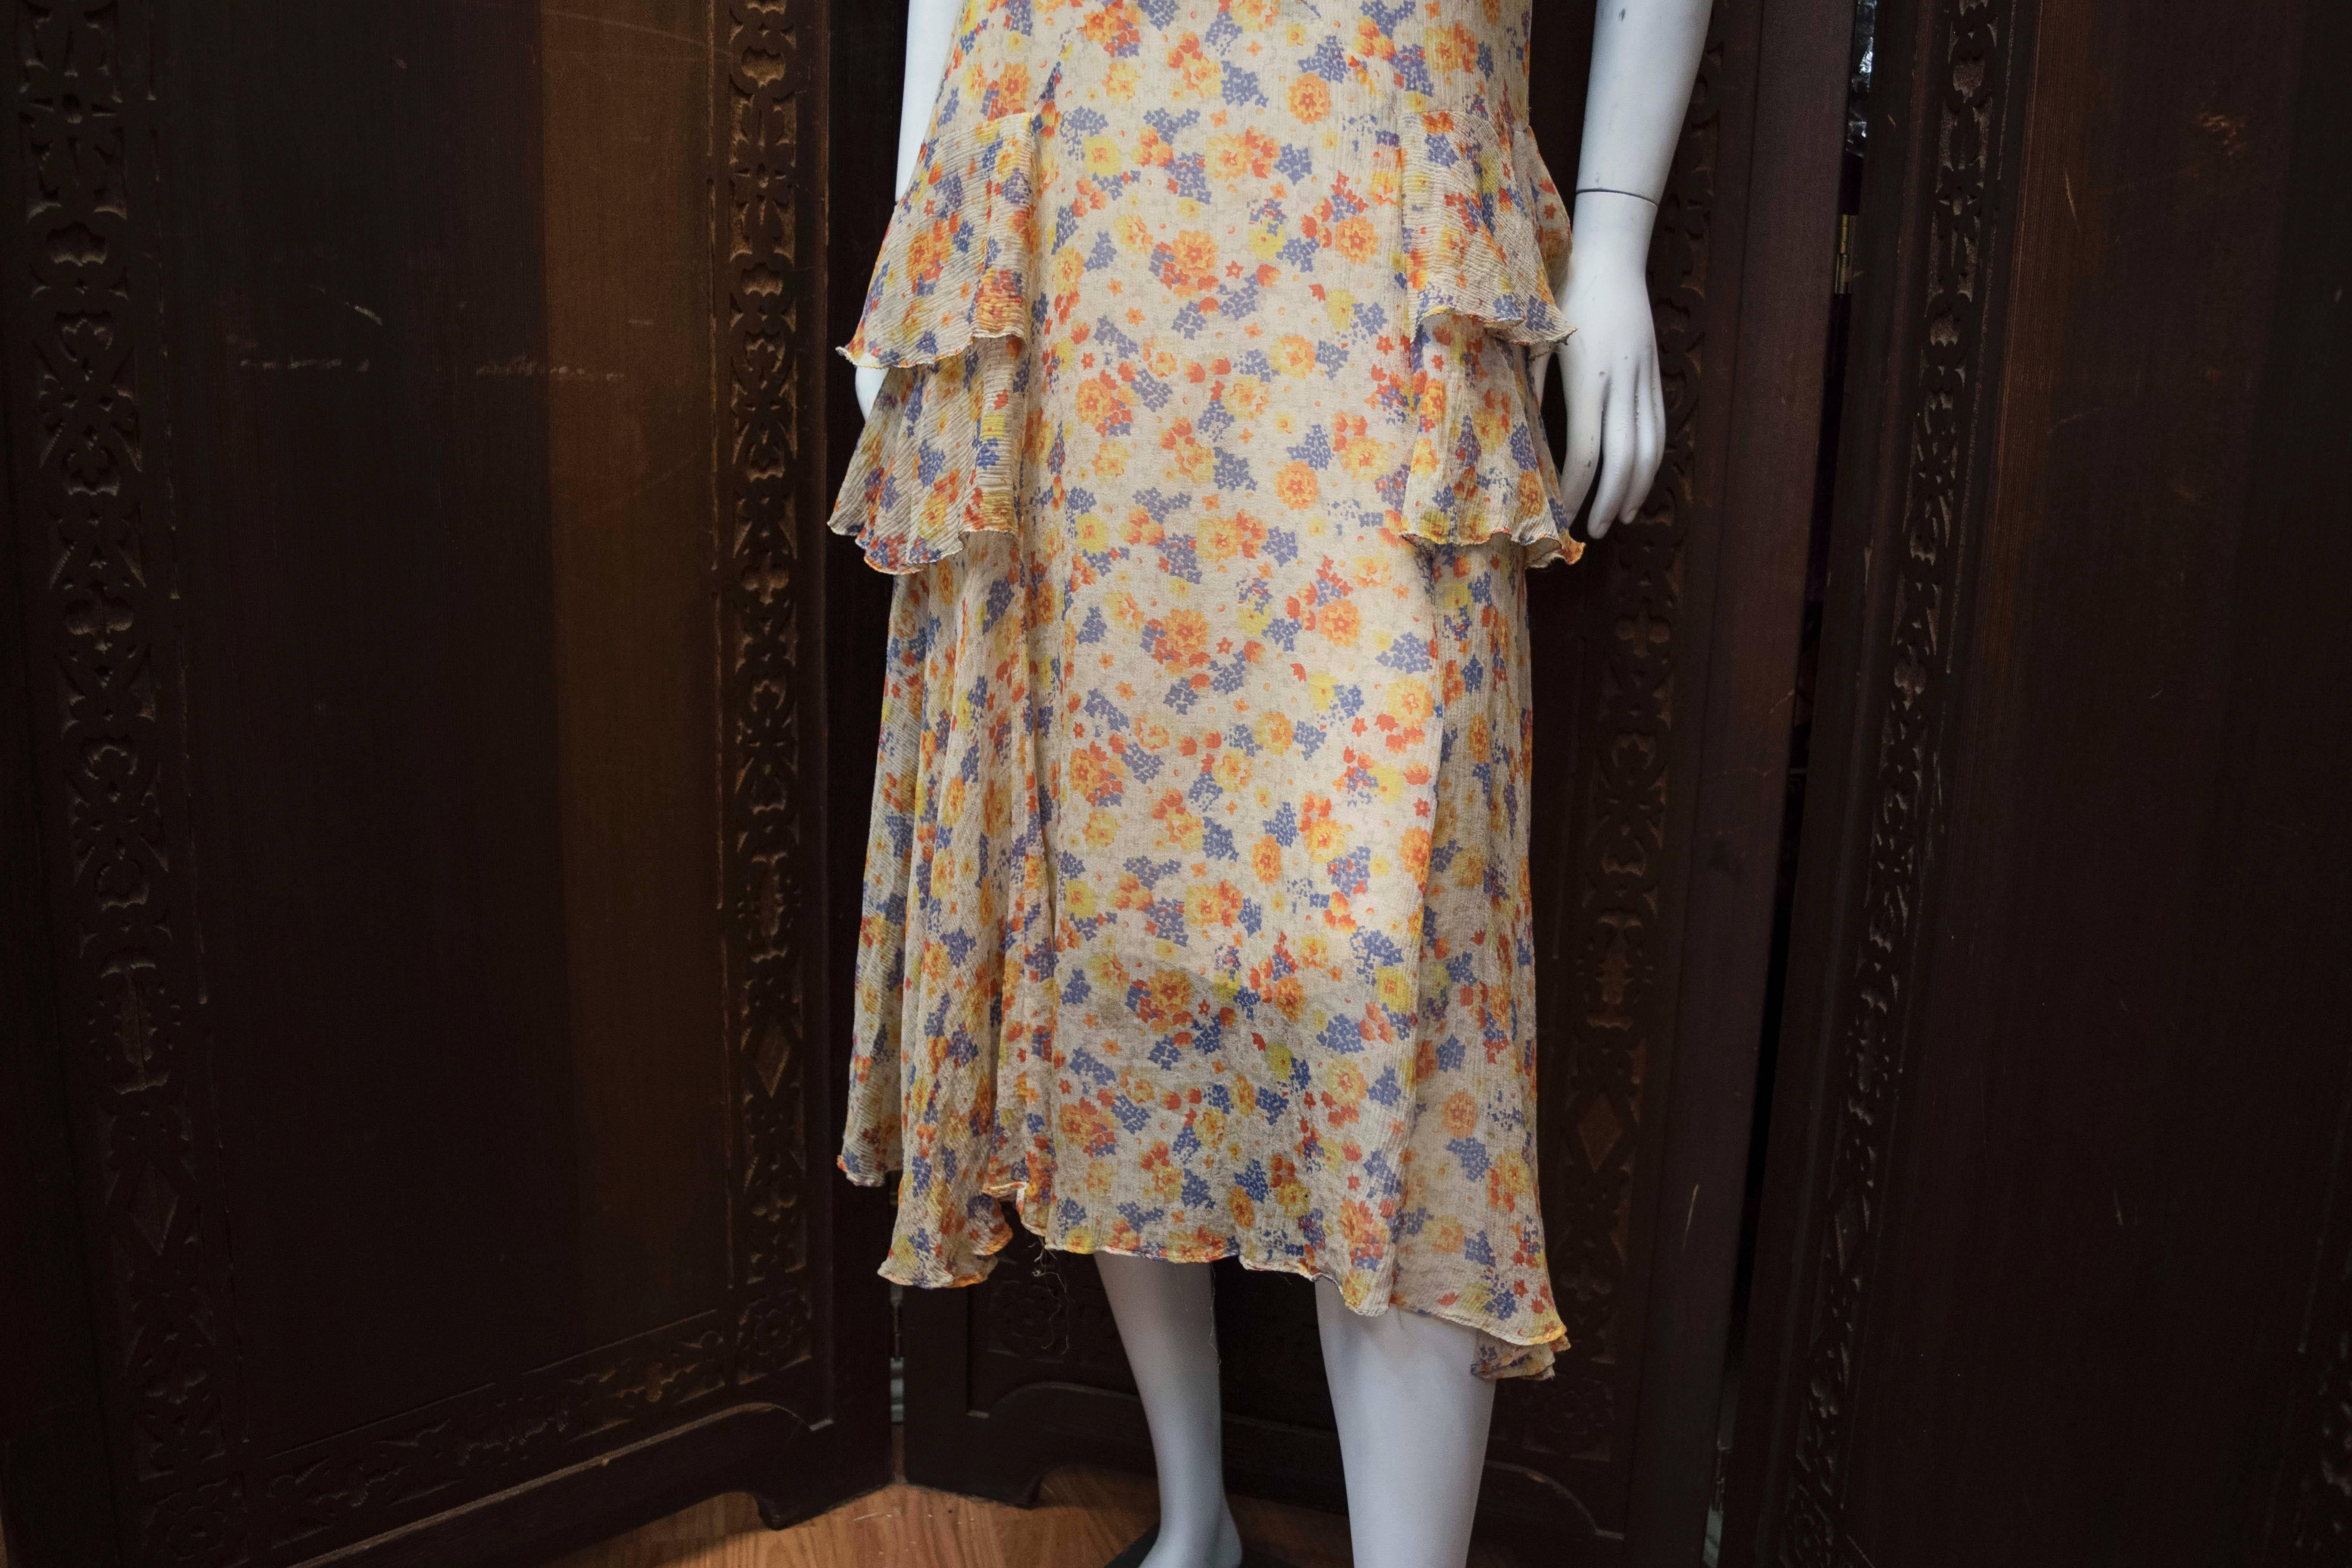 Late 1920s Silk Chiffon Floral Dress

The piece has a built in lining, and is completely wearable.

B 34
W 30
H 40 
L 46